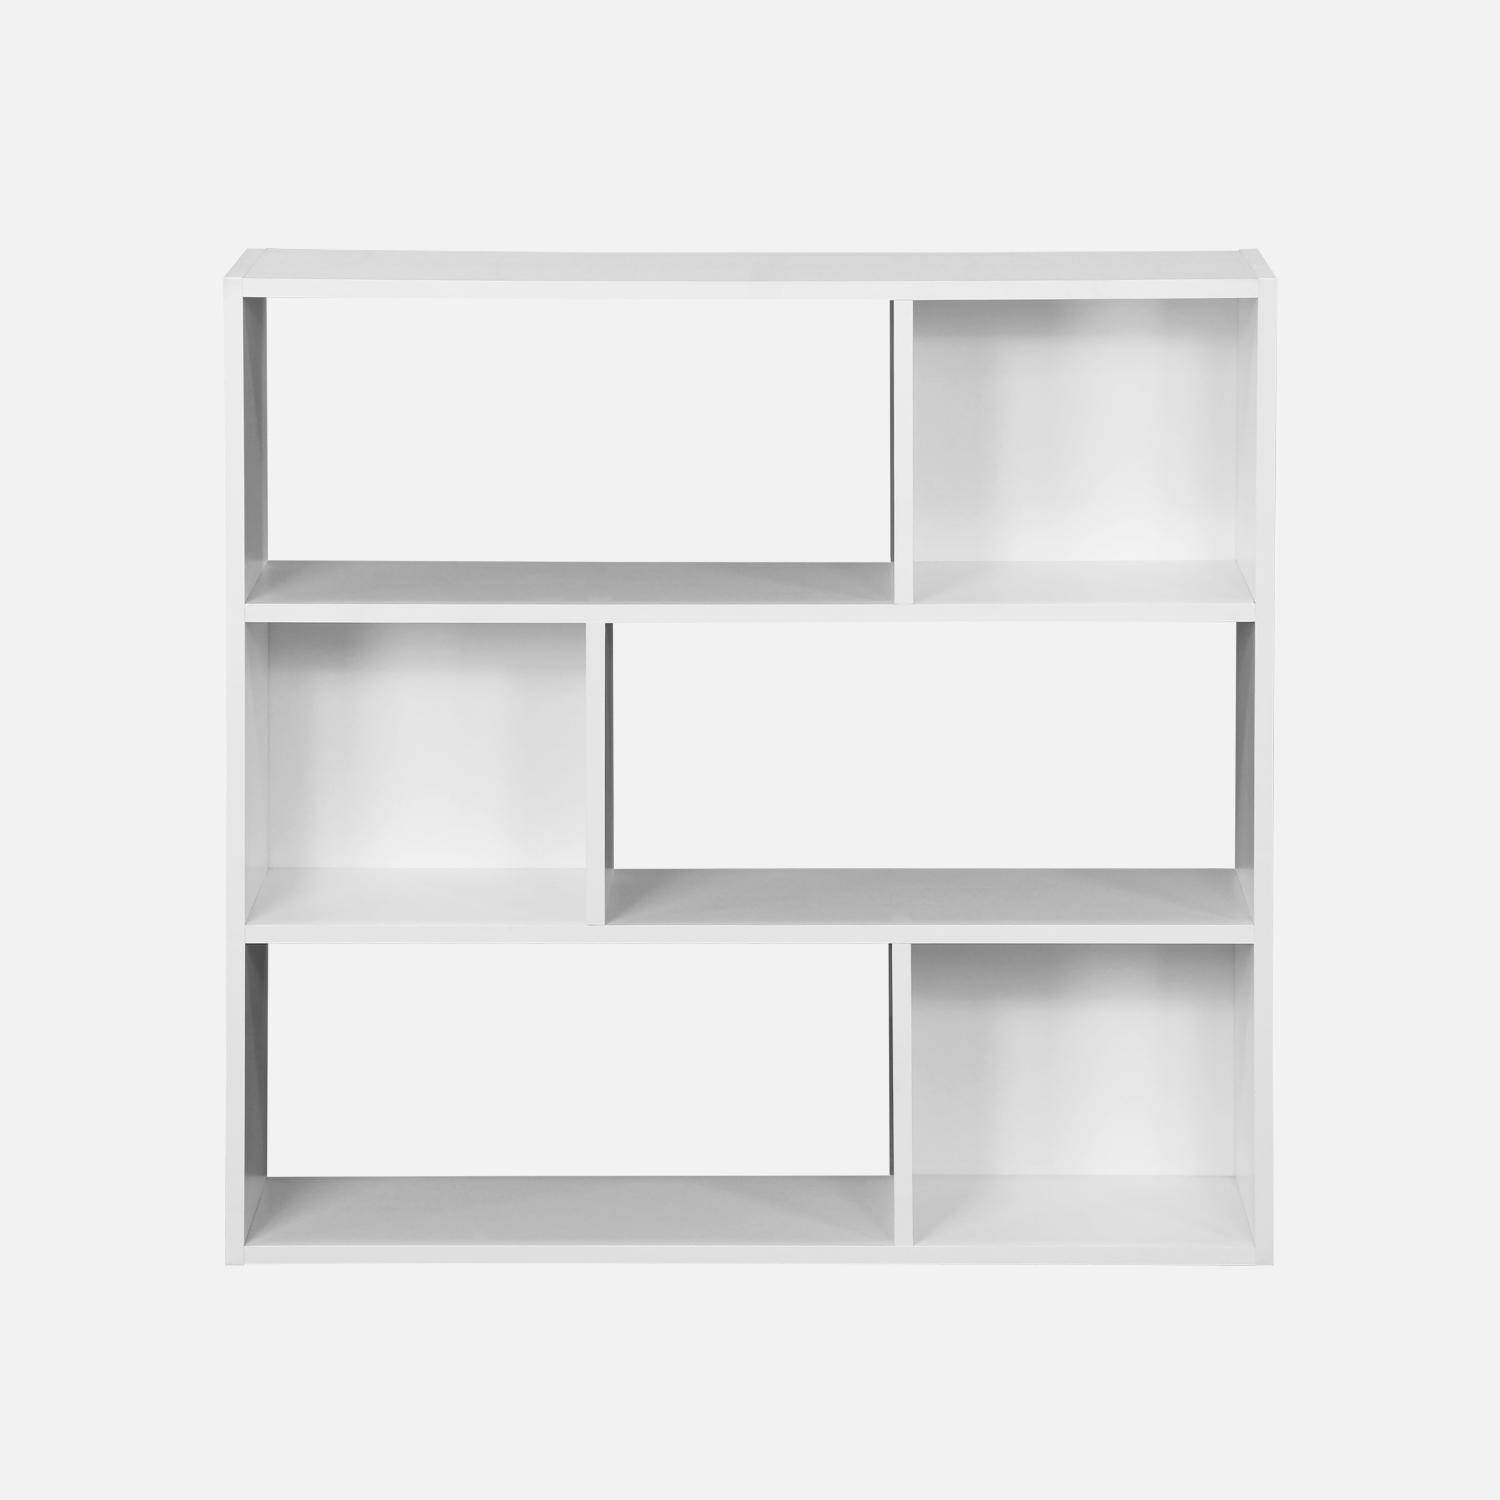 3-shelf bookcase with 6 compartments, white, L83xW23xH80cm, Pieter,sweeek,Photo3